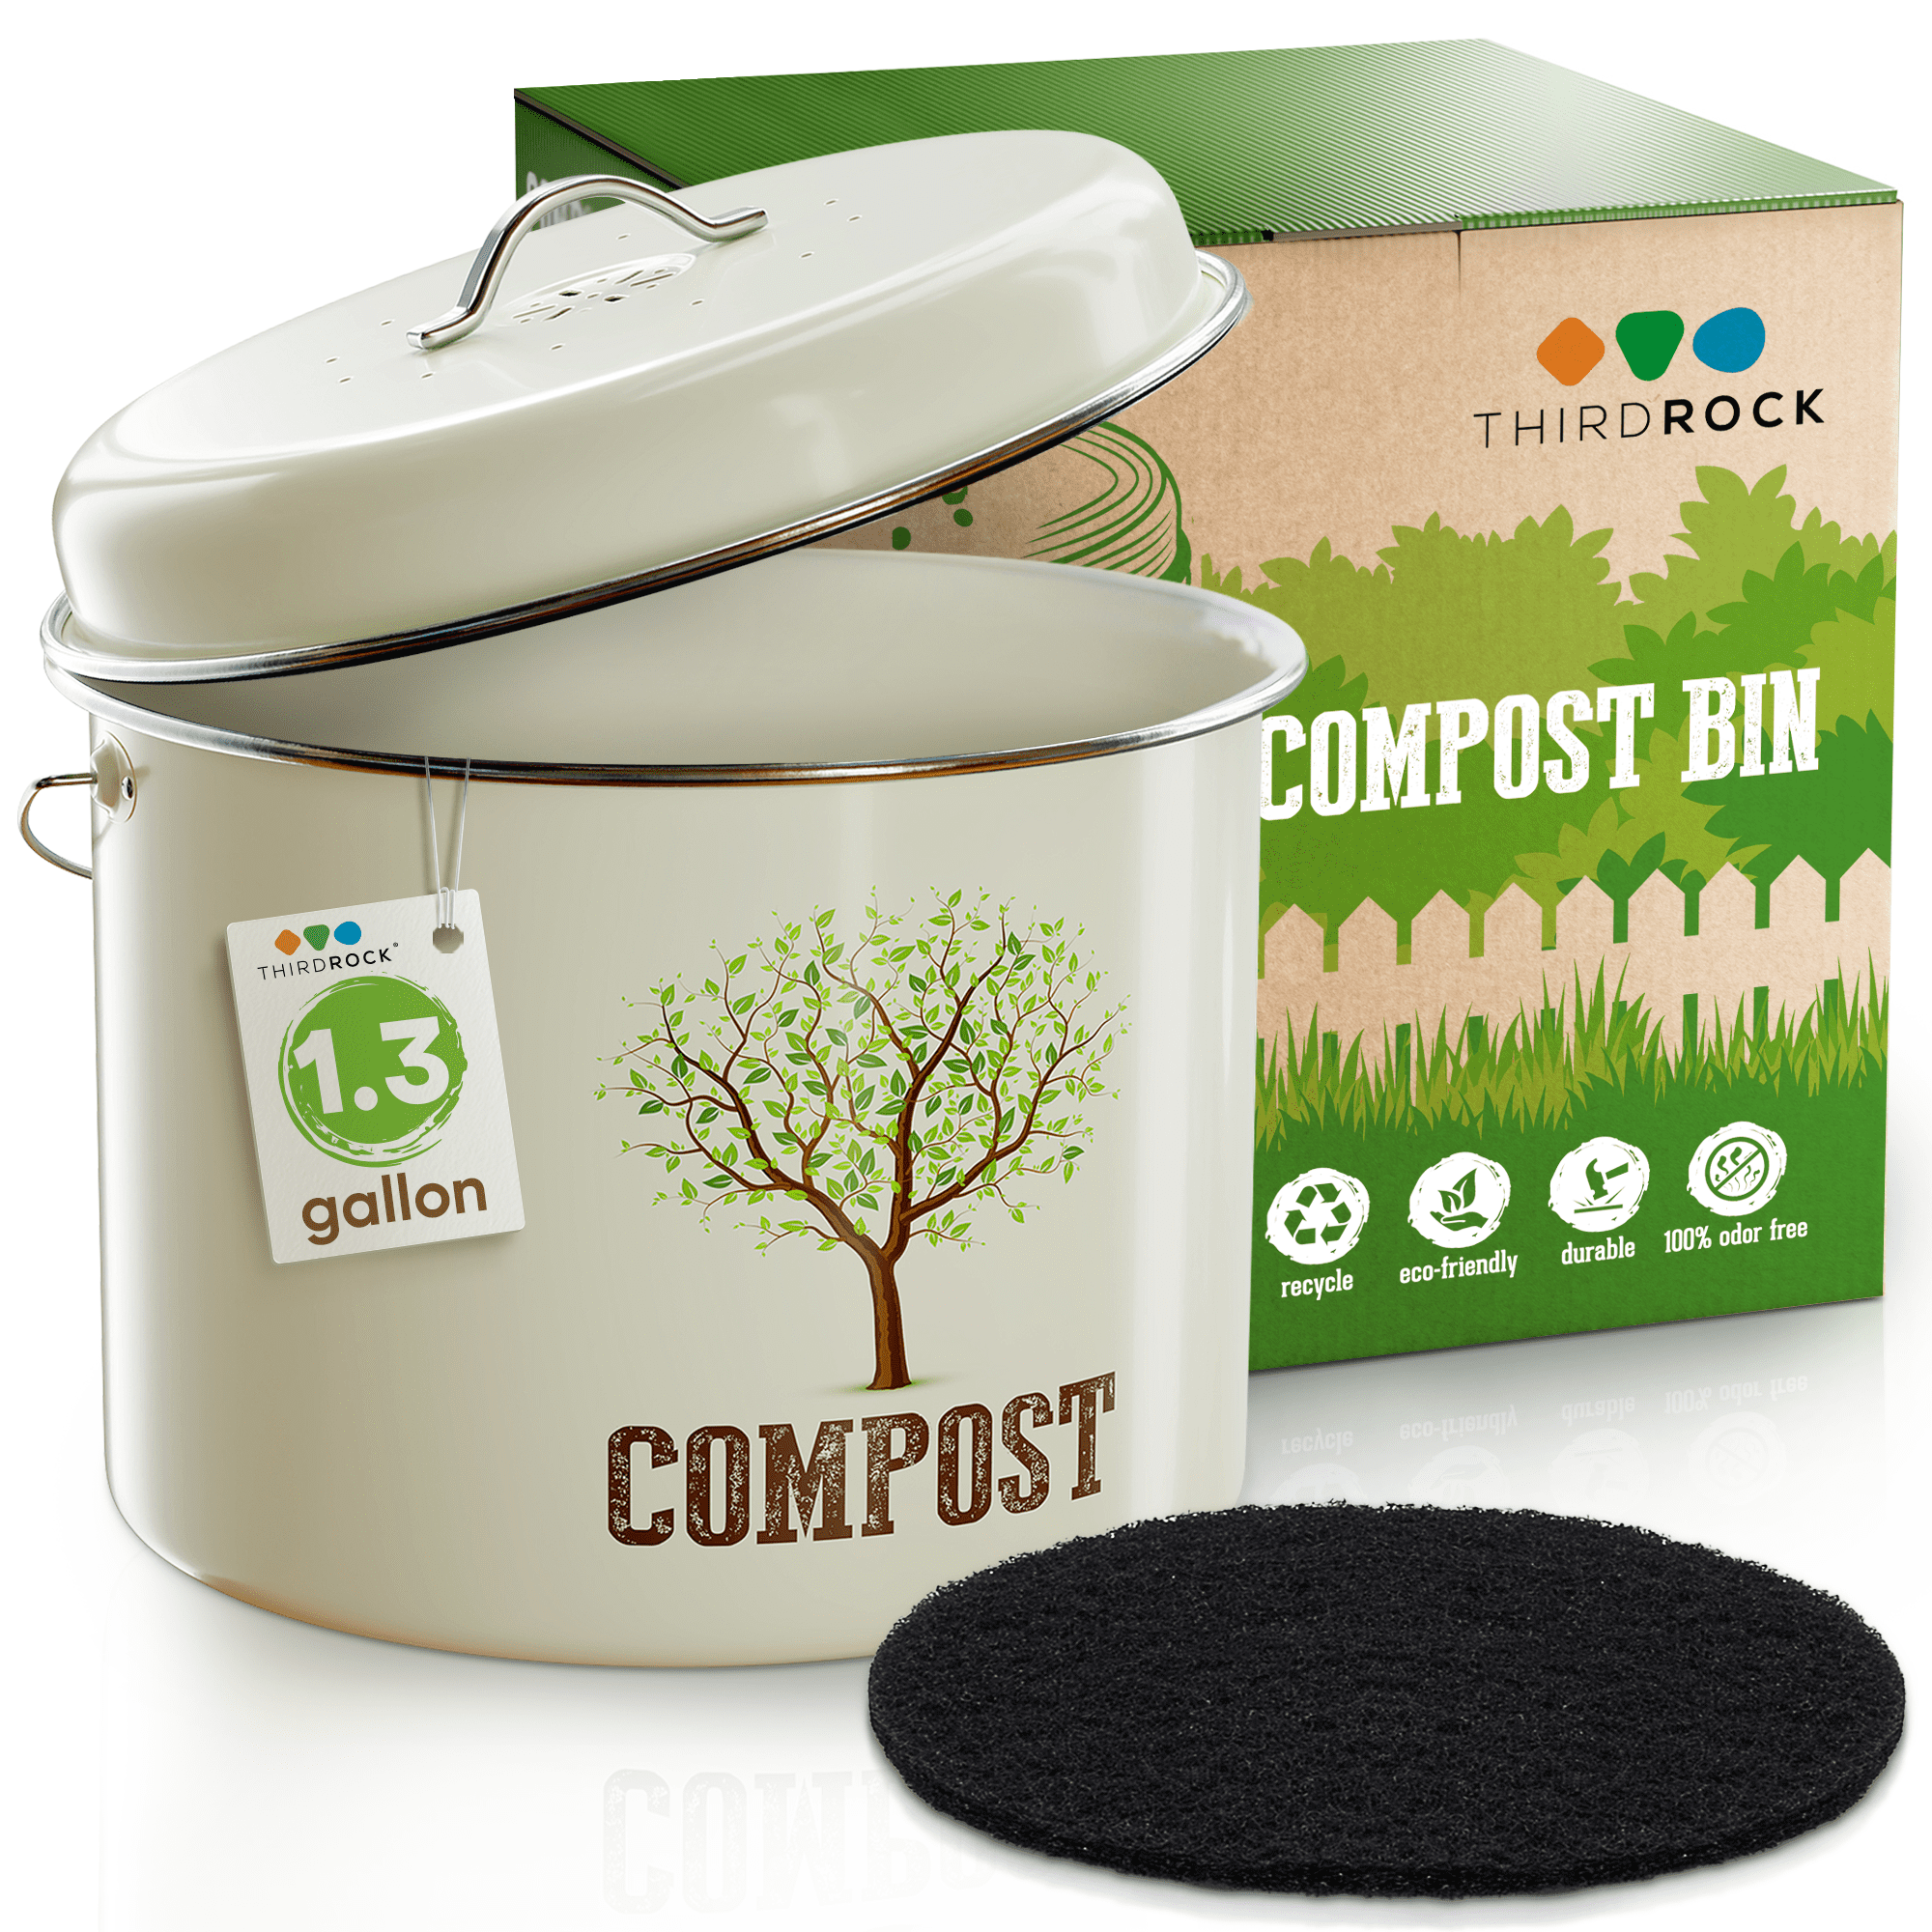 iTouchless 1.6 Gal. Titanium Oval Compost Bin with AbsorbX Odor